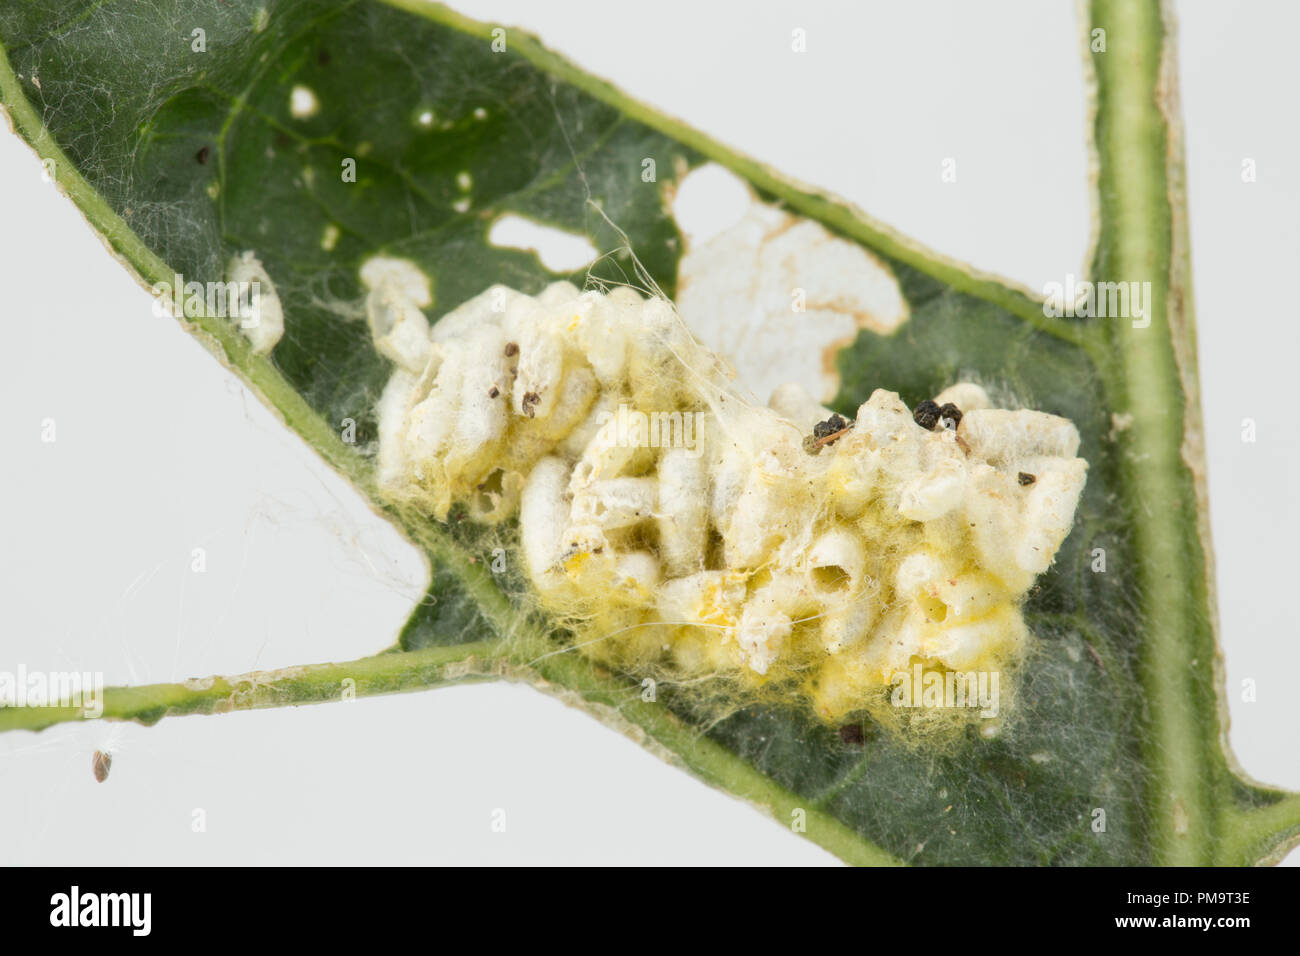 Cocoons of the larvae of a parasitic wasp, Cotesia glomerata. The wasp lays its eggs inside a caterpillar and the larvae develop inside it, ultimately Stock Photo